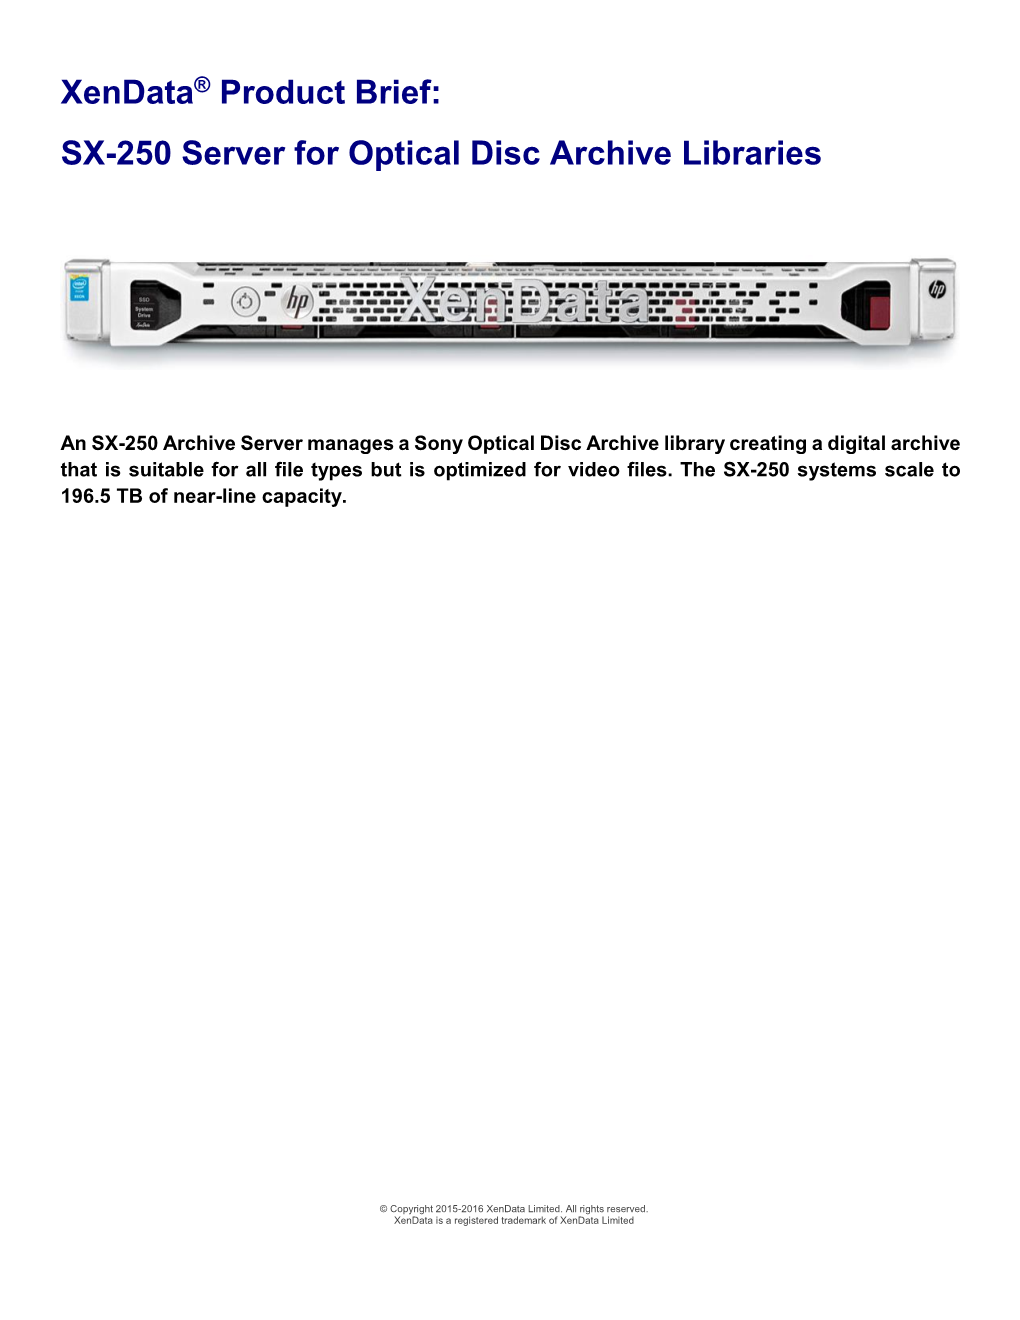 Xendata® Product Brief: SX-250 Server for Optical Disc Archive Libraries